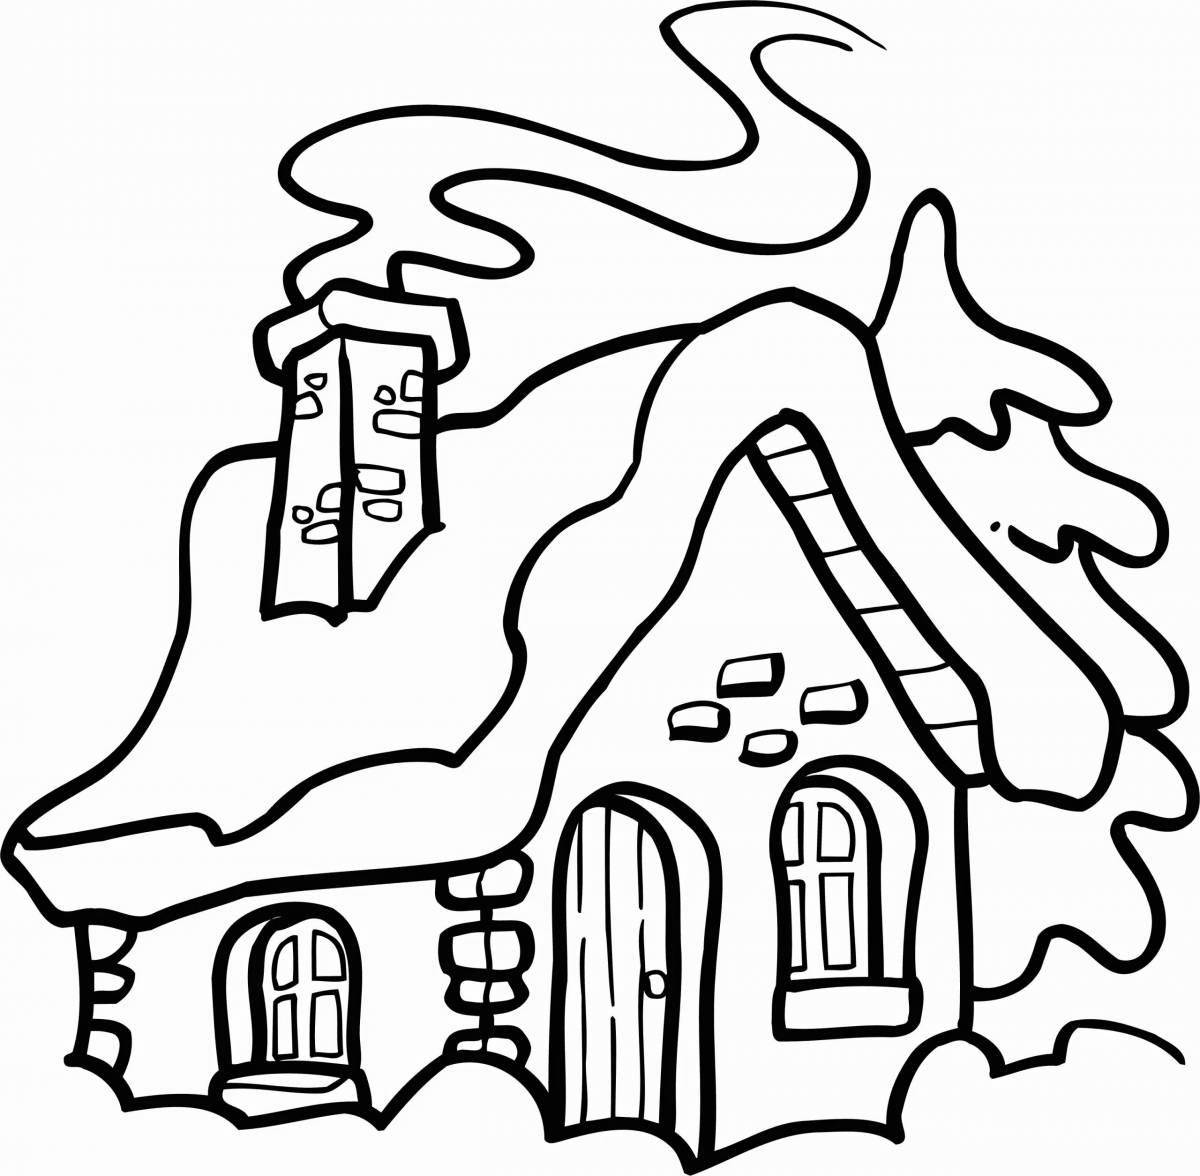 Rough snow house coloring page